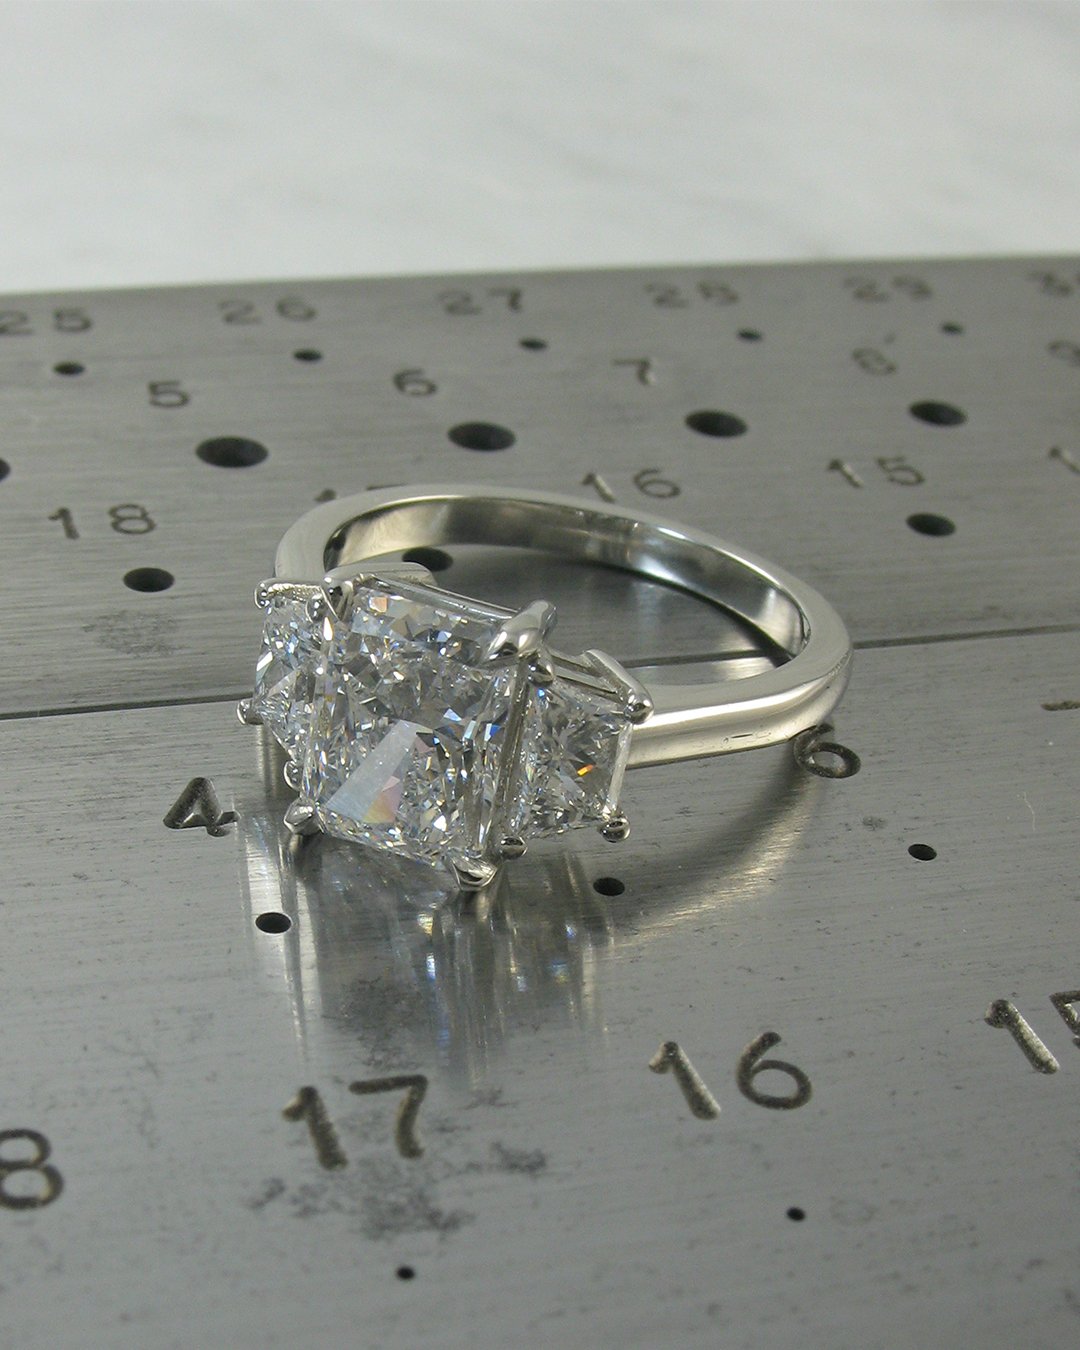 A radiant cut and trapezoid bespoke diamond engagement ring